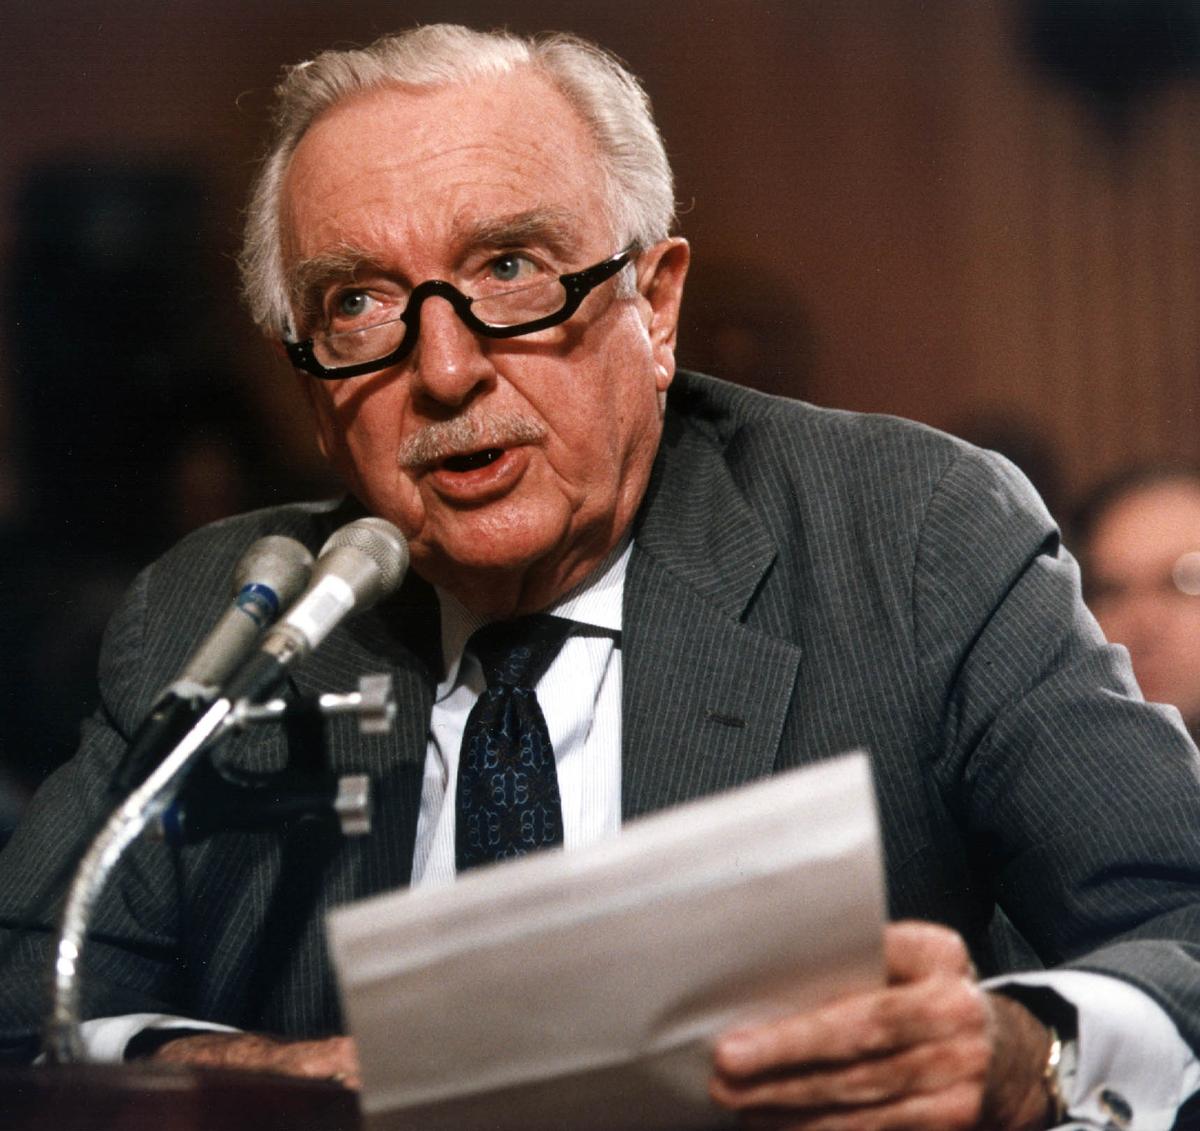 Cronkite testifies before the US Senate Committee on Governmental Affairs concerning the Pentagon rules on media access to the Persian Gulf War in Washington on Feb. 20, 1991. (LUKE FRAZZA/AFP via Getty Images)